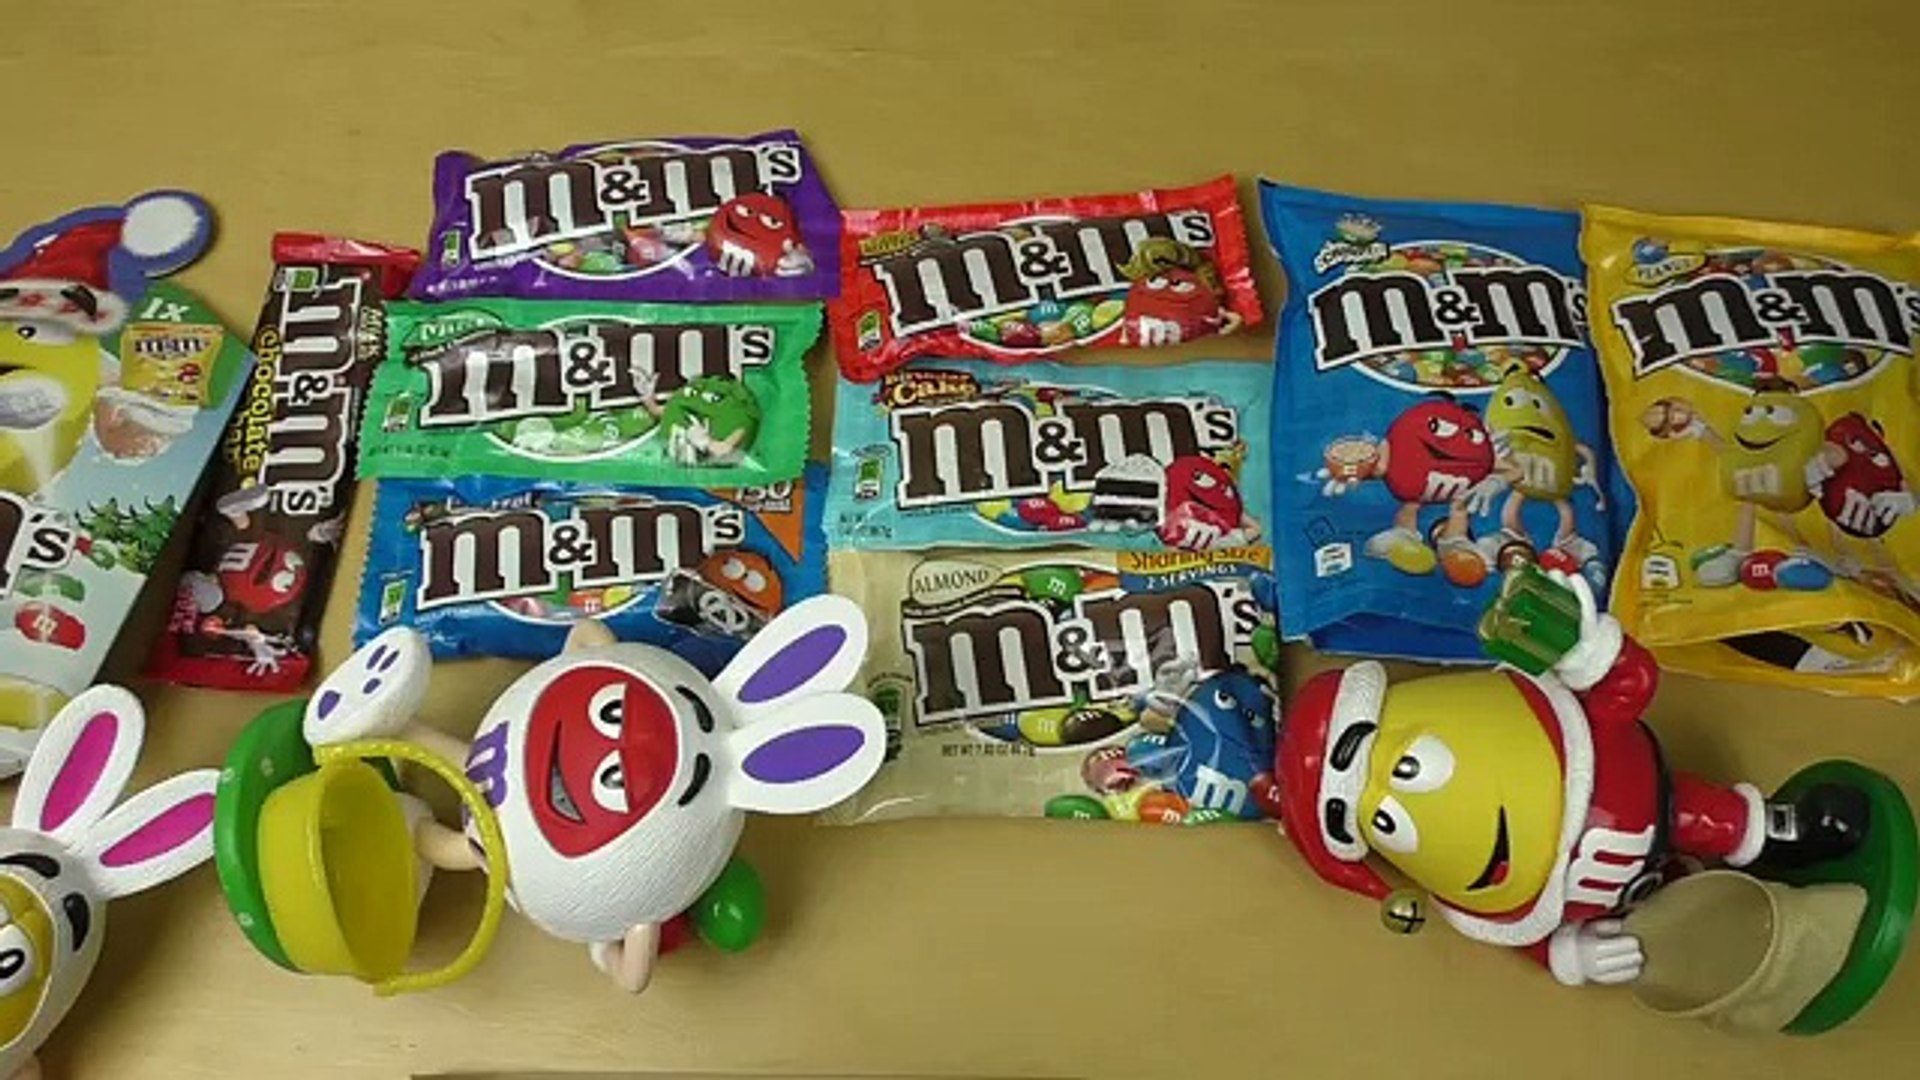 most satisfying M &Ms candy 🍫 chocolate #sound#viralshortvideo 